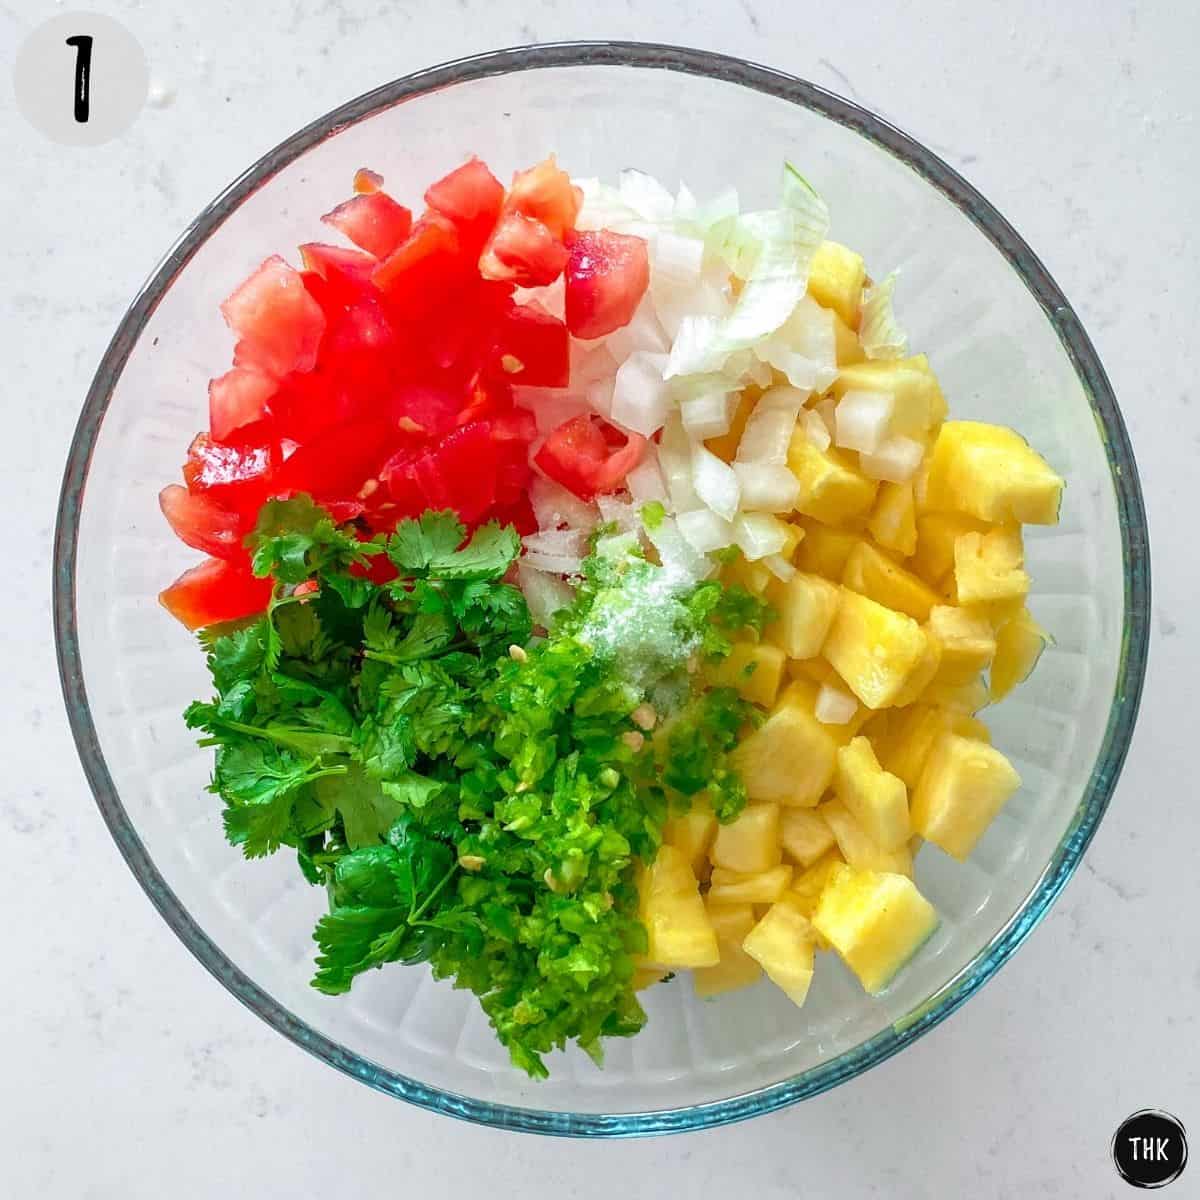 Large glass bowl with diced tomato, onion, pineapple and cilantro inside.